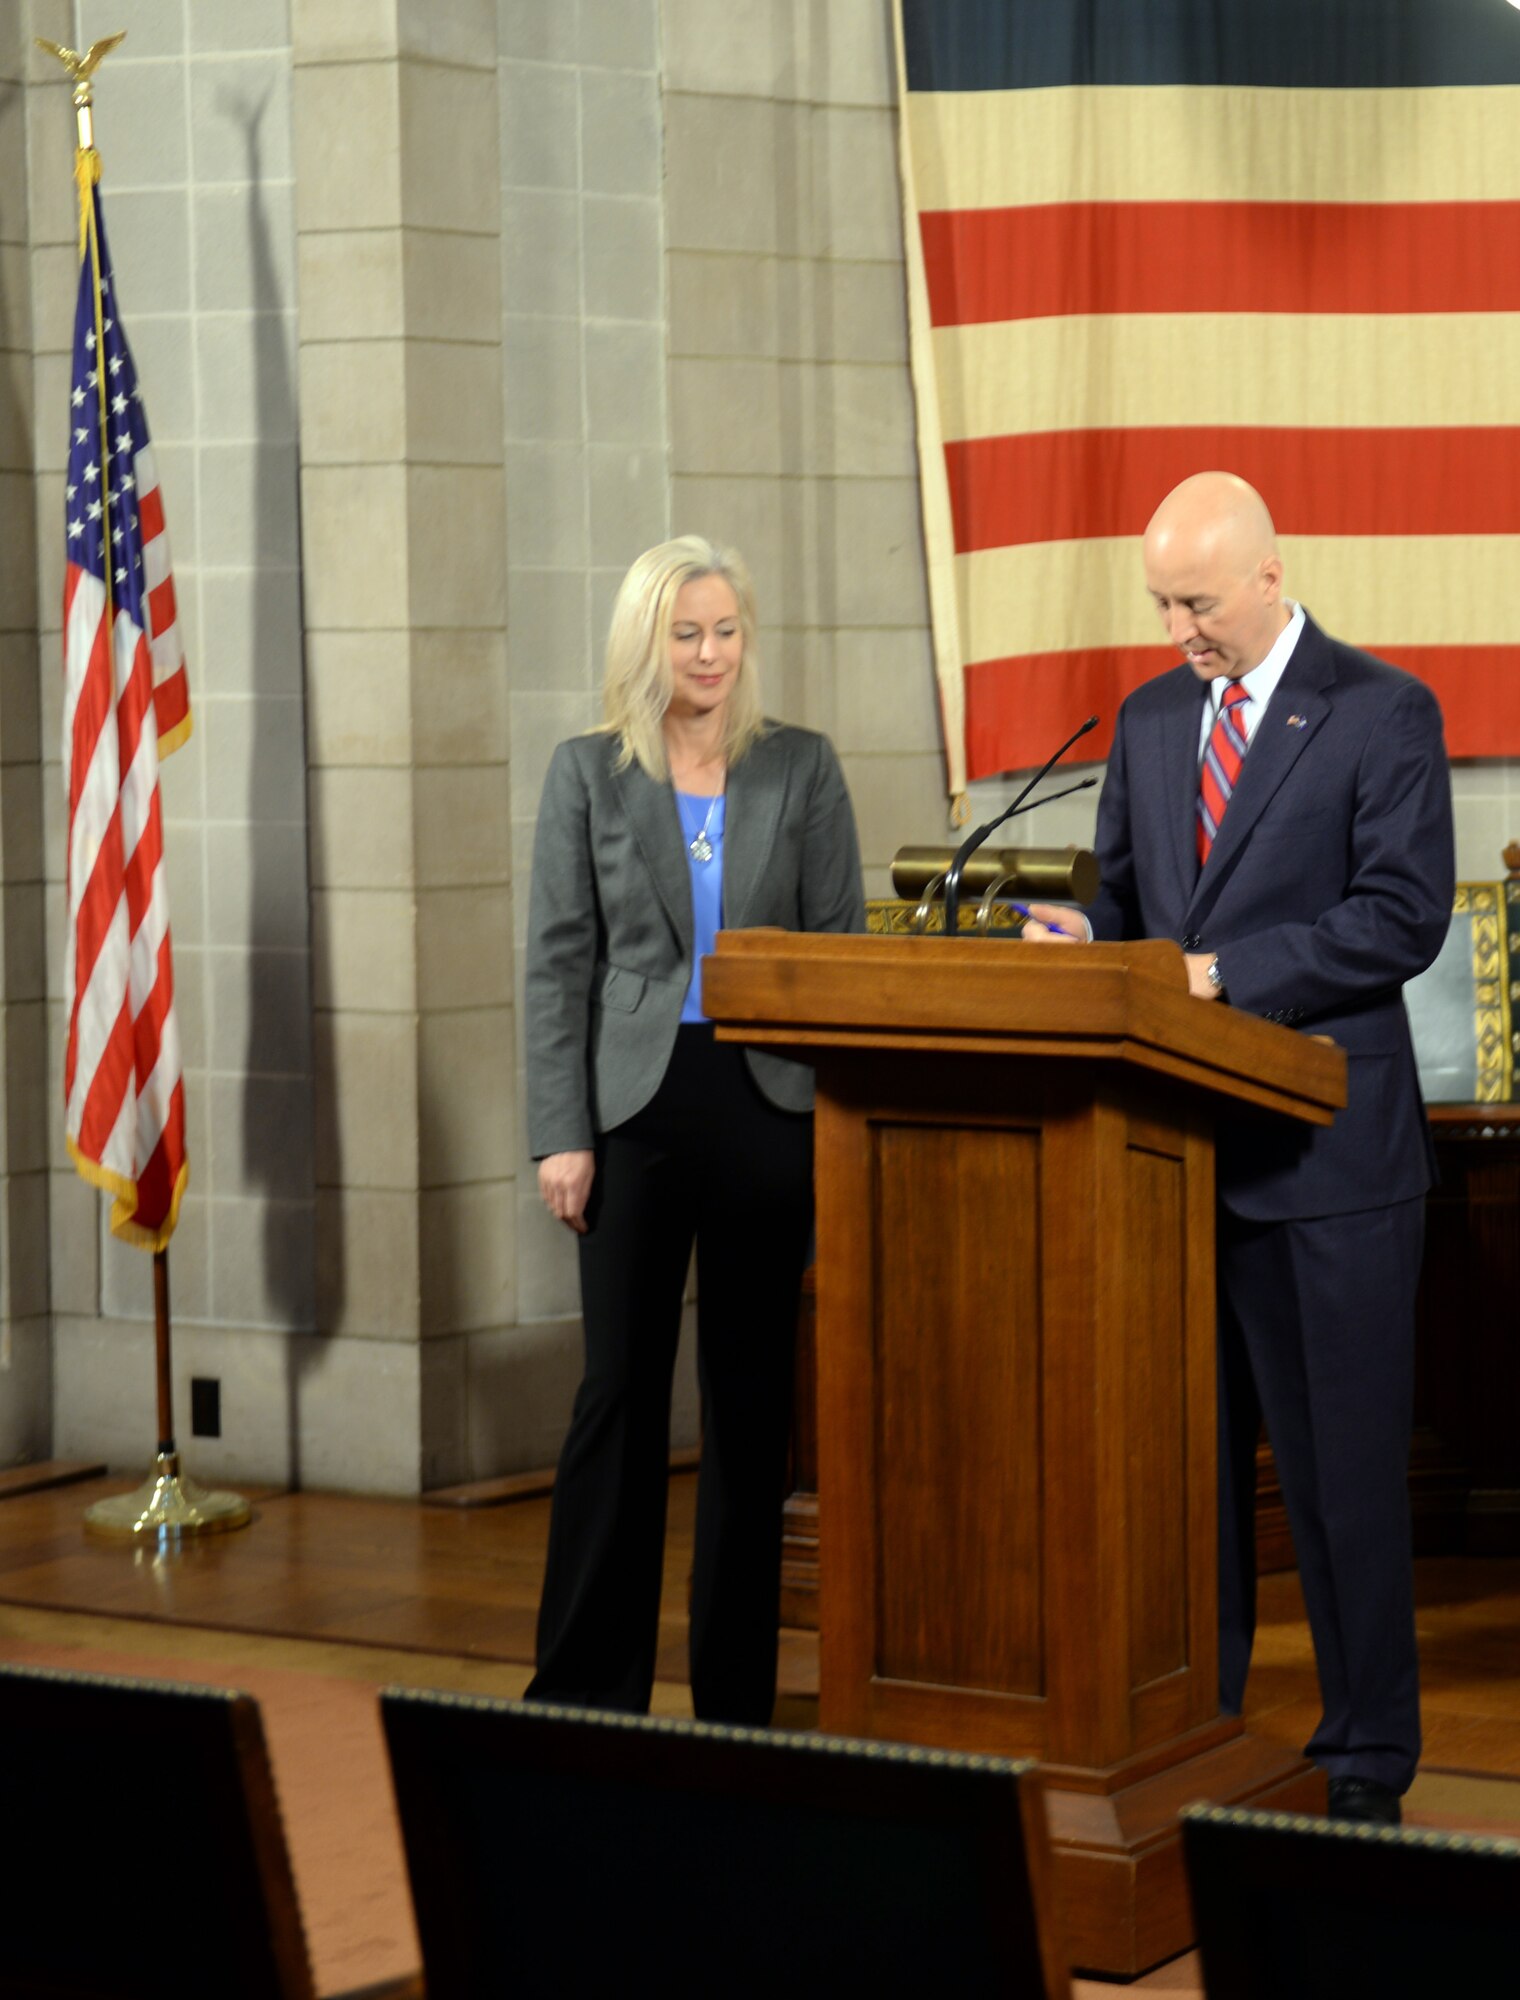 Nebraska Gov. Pete Ricketts signs a change to Rule 21, which regulates state teaching licenses, as Shannon Manion, a certified teacher and veteran school administrator as well as the spouse of Col. Michael Manion, 55th Wing commander, looks on at the Nebraska State Capitol Building in Lincoln, nebraska on March 19, 2018. Manion, along with other Offutt-based military spouses, were invited to witness the governor sign the rule change will make it easier for military spouses to teach immediately if they have recently arrived from out of state.